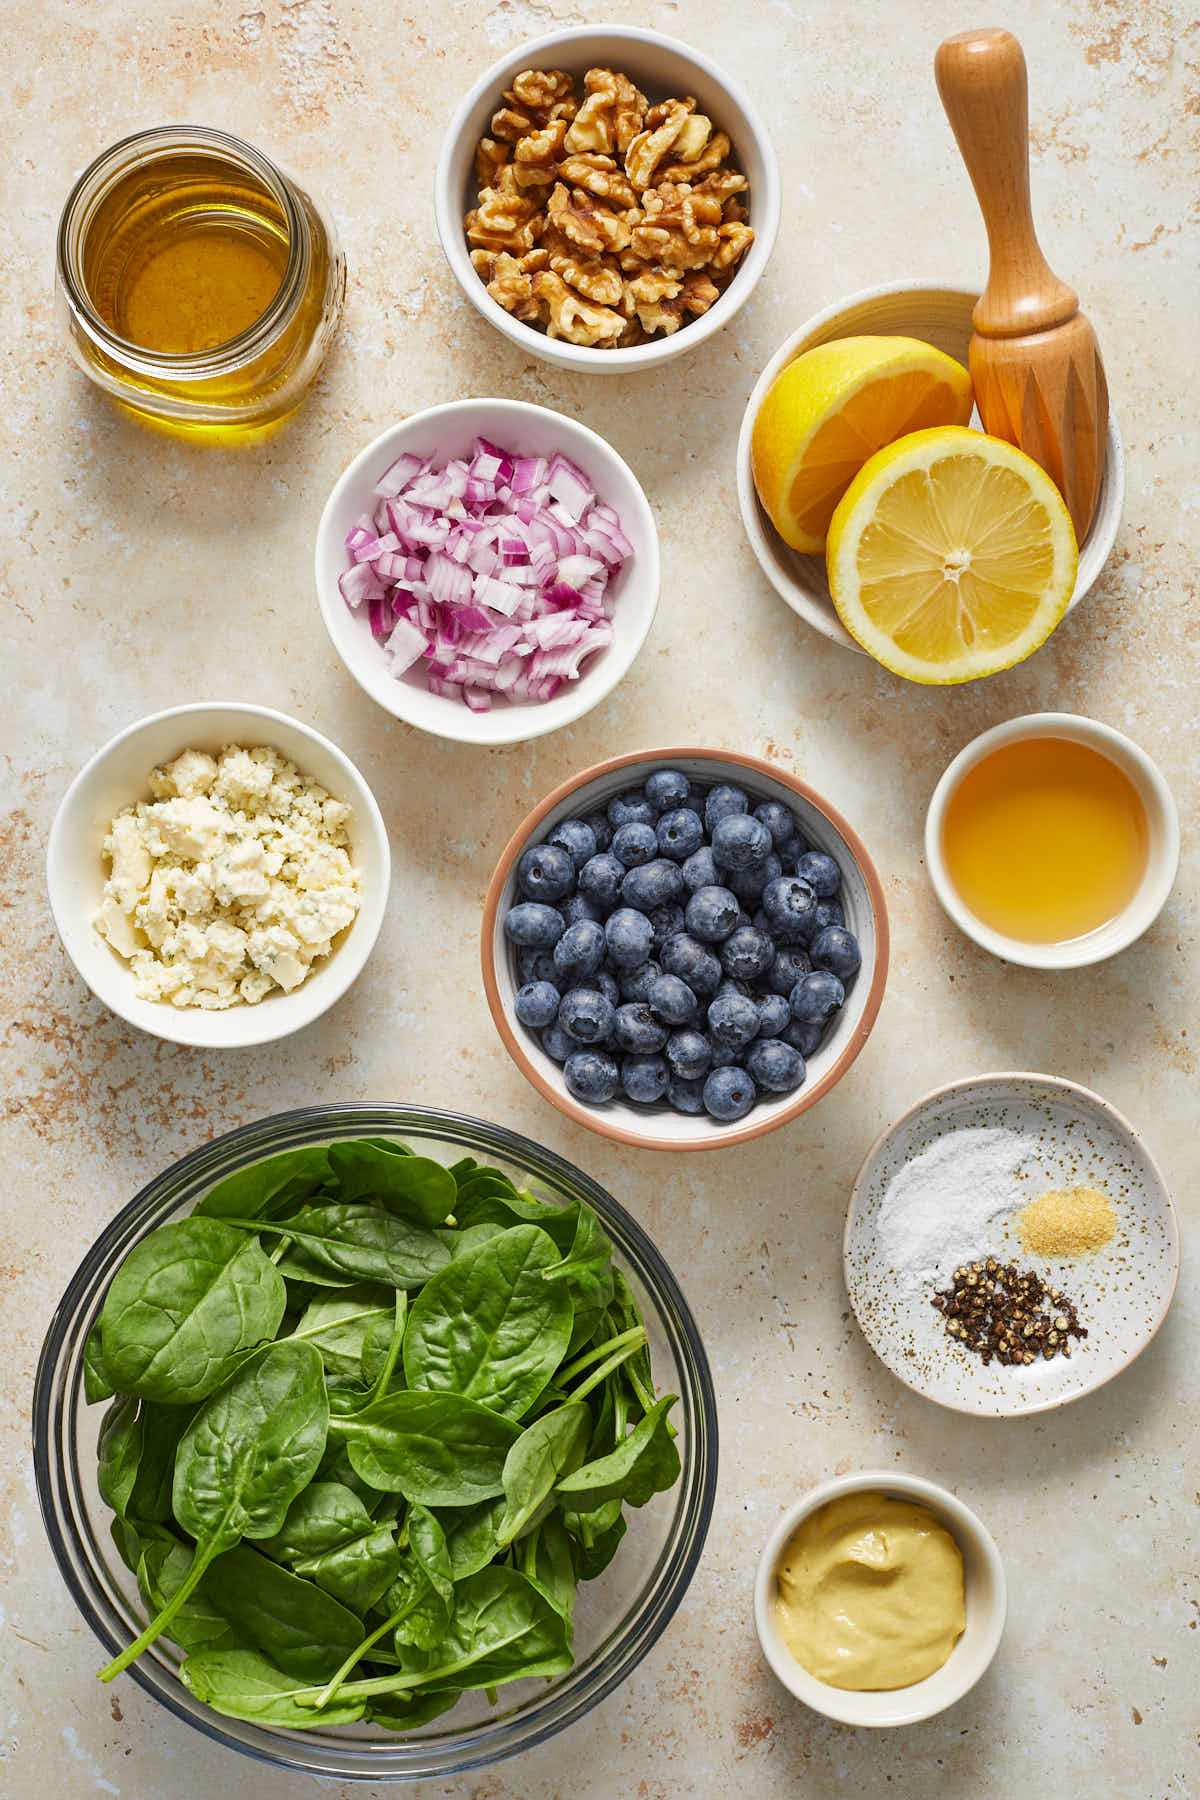 Ingredients to make blueberry spinach salad arranged in individual bowls.